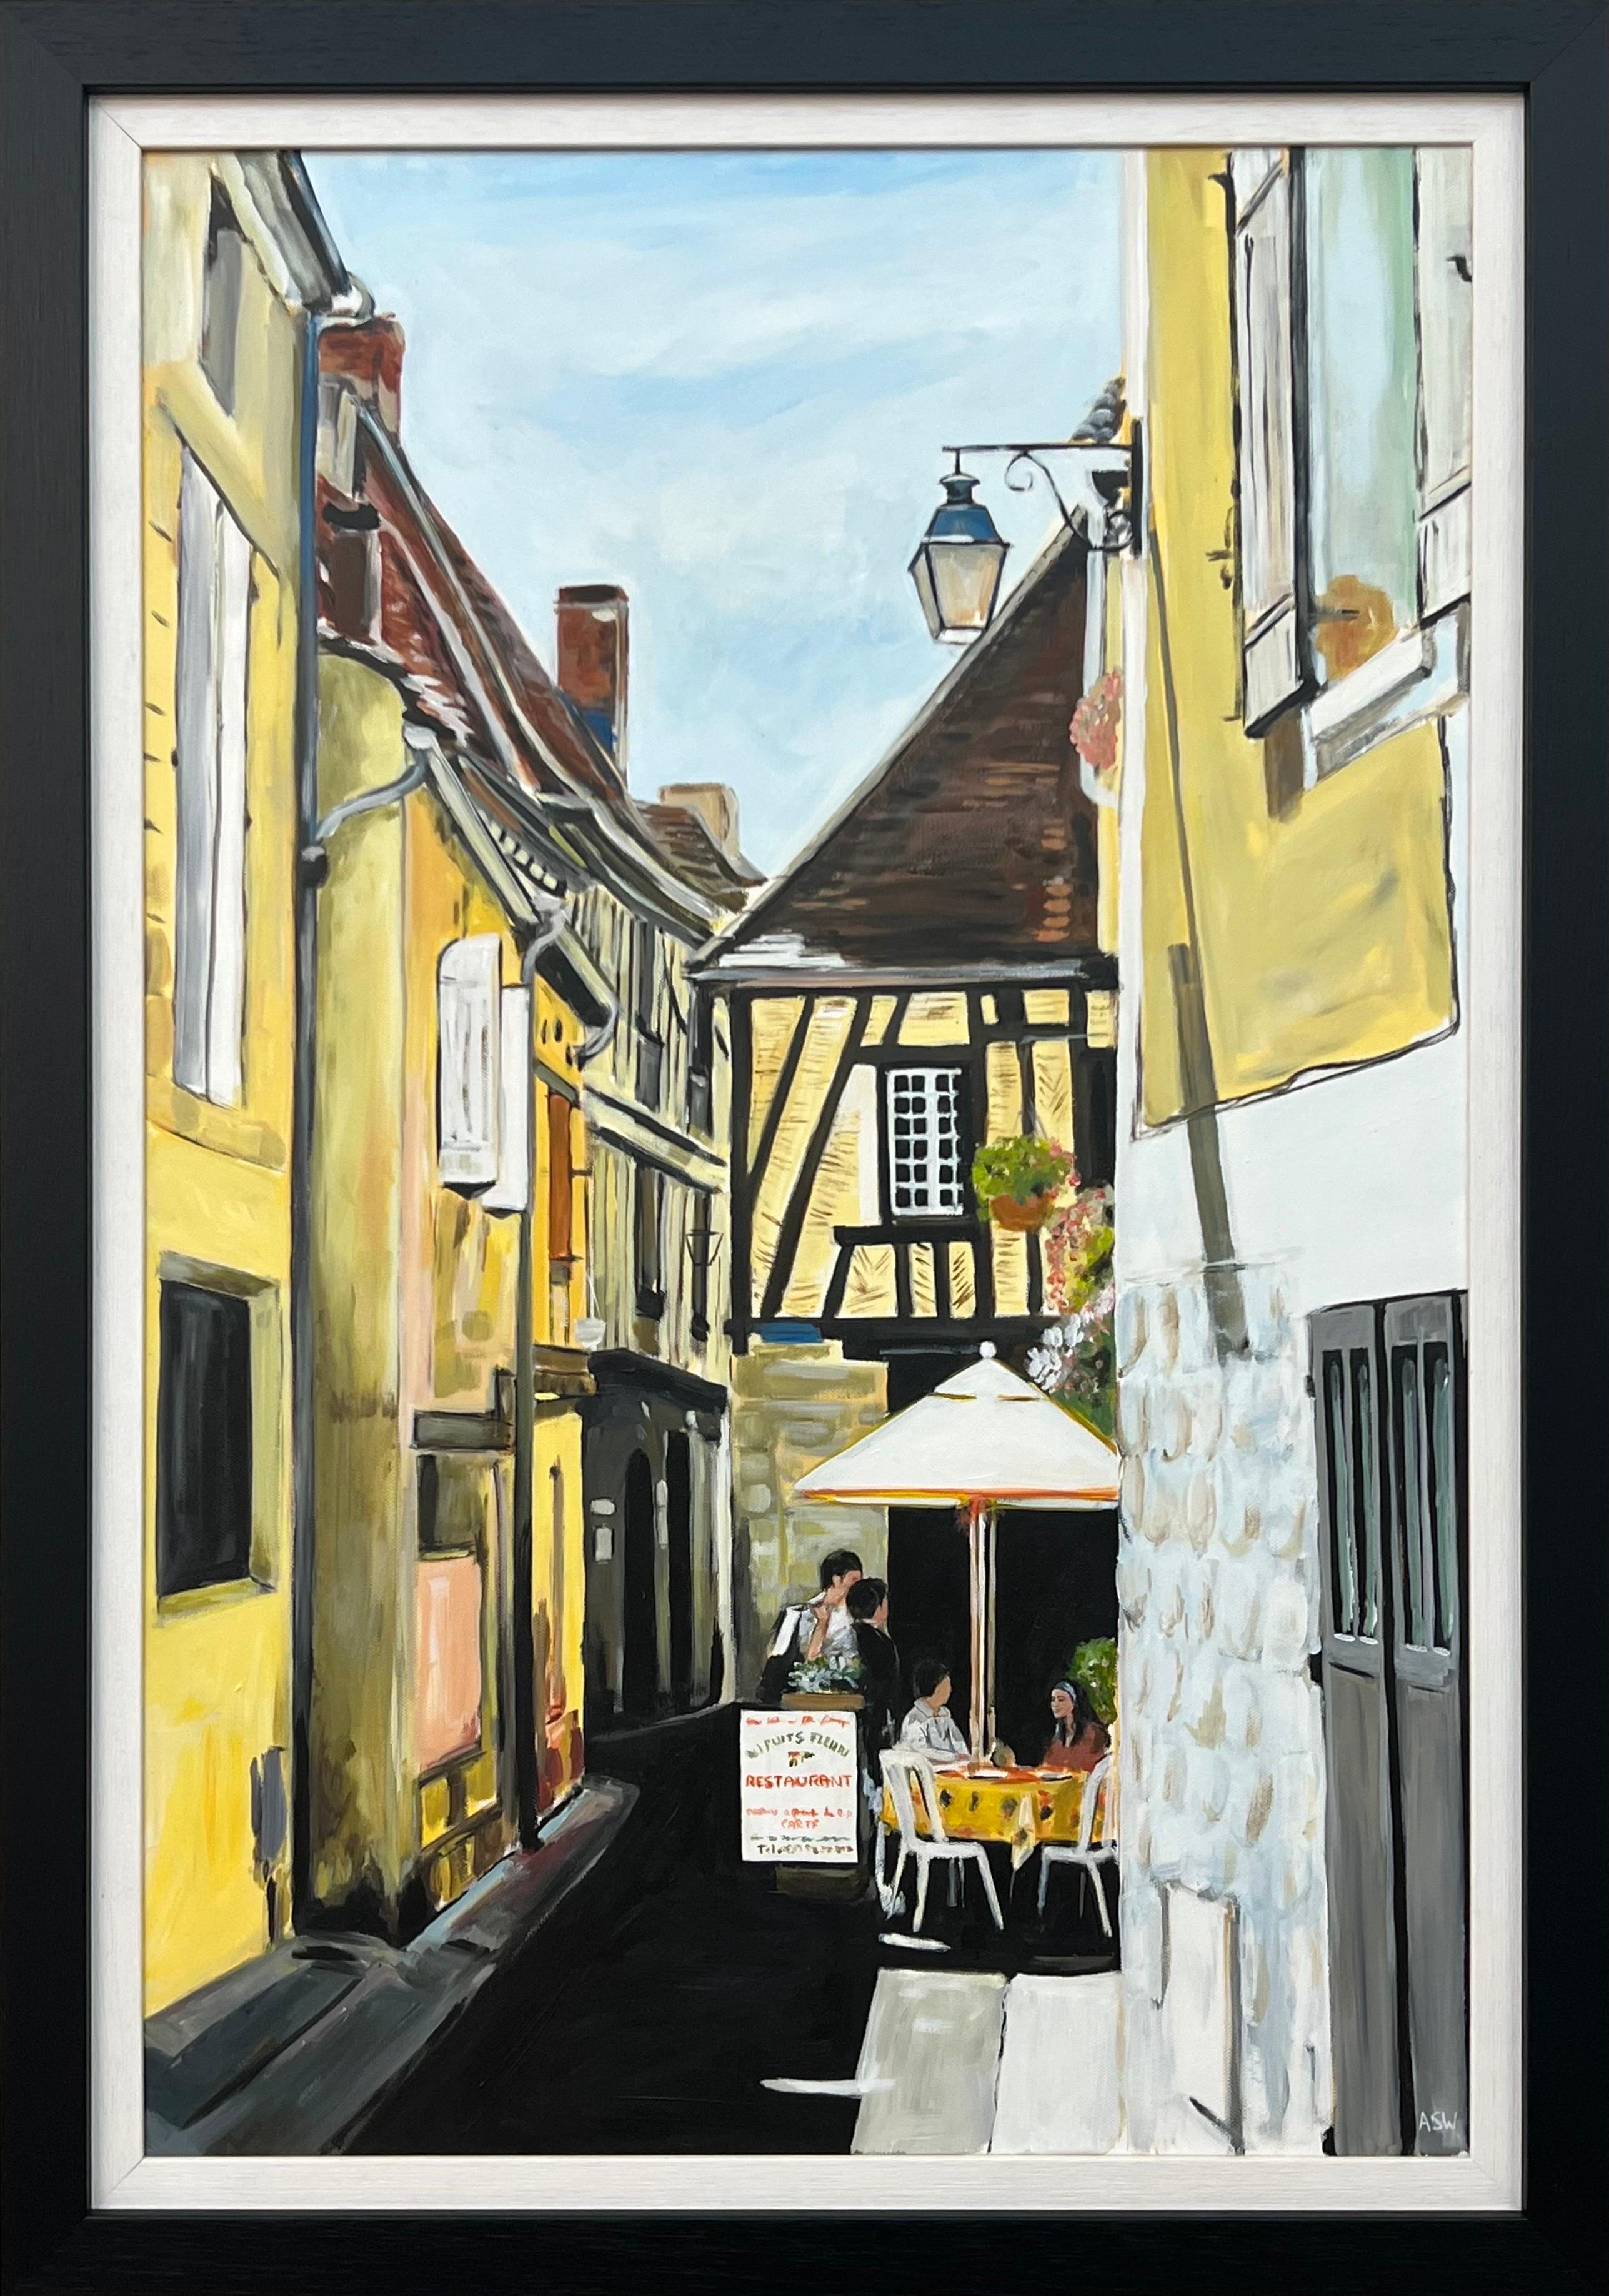 Painting of Bergerac Old Town Cafe in France by Contemporary British Artist